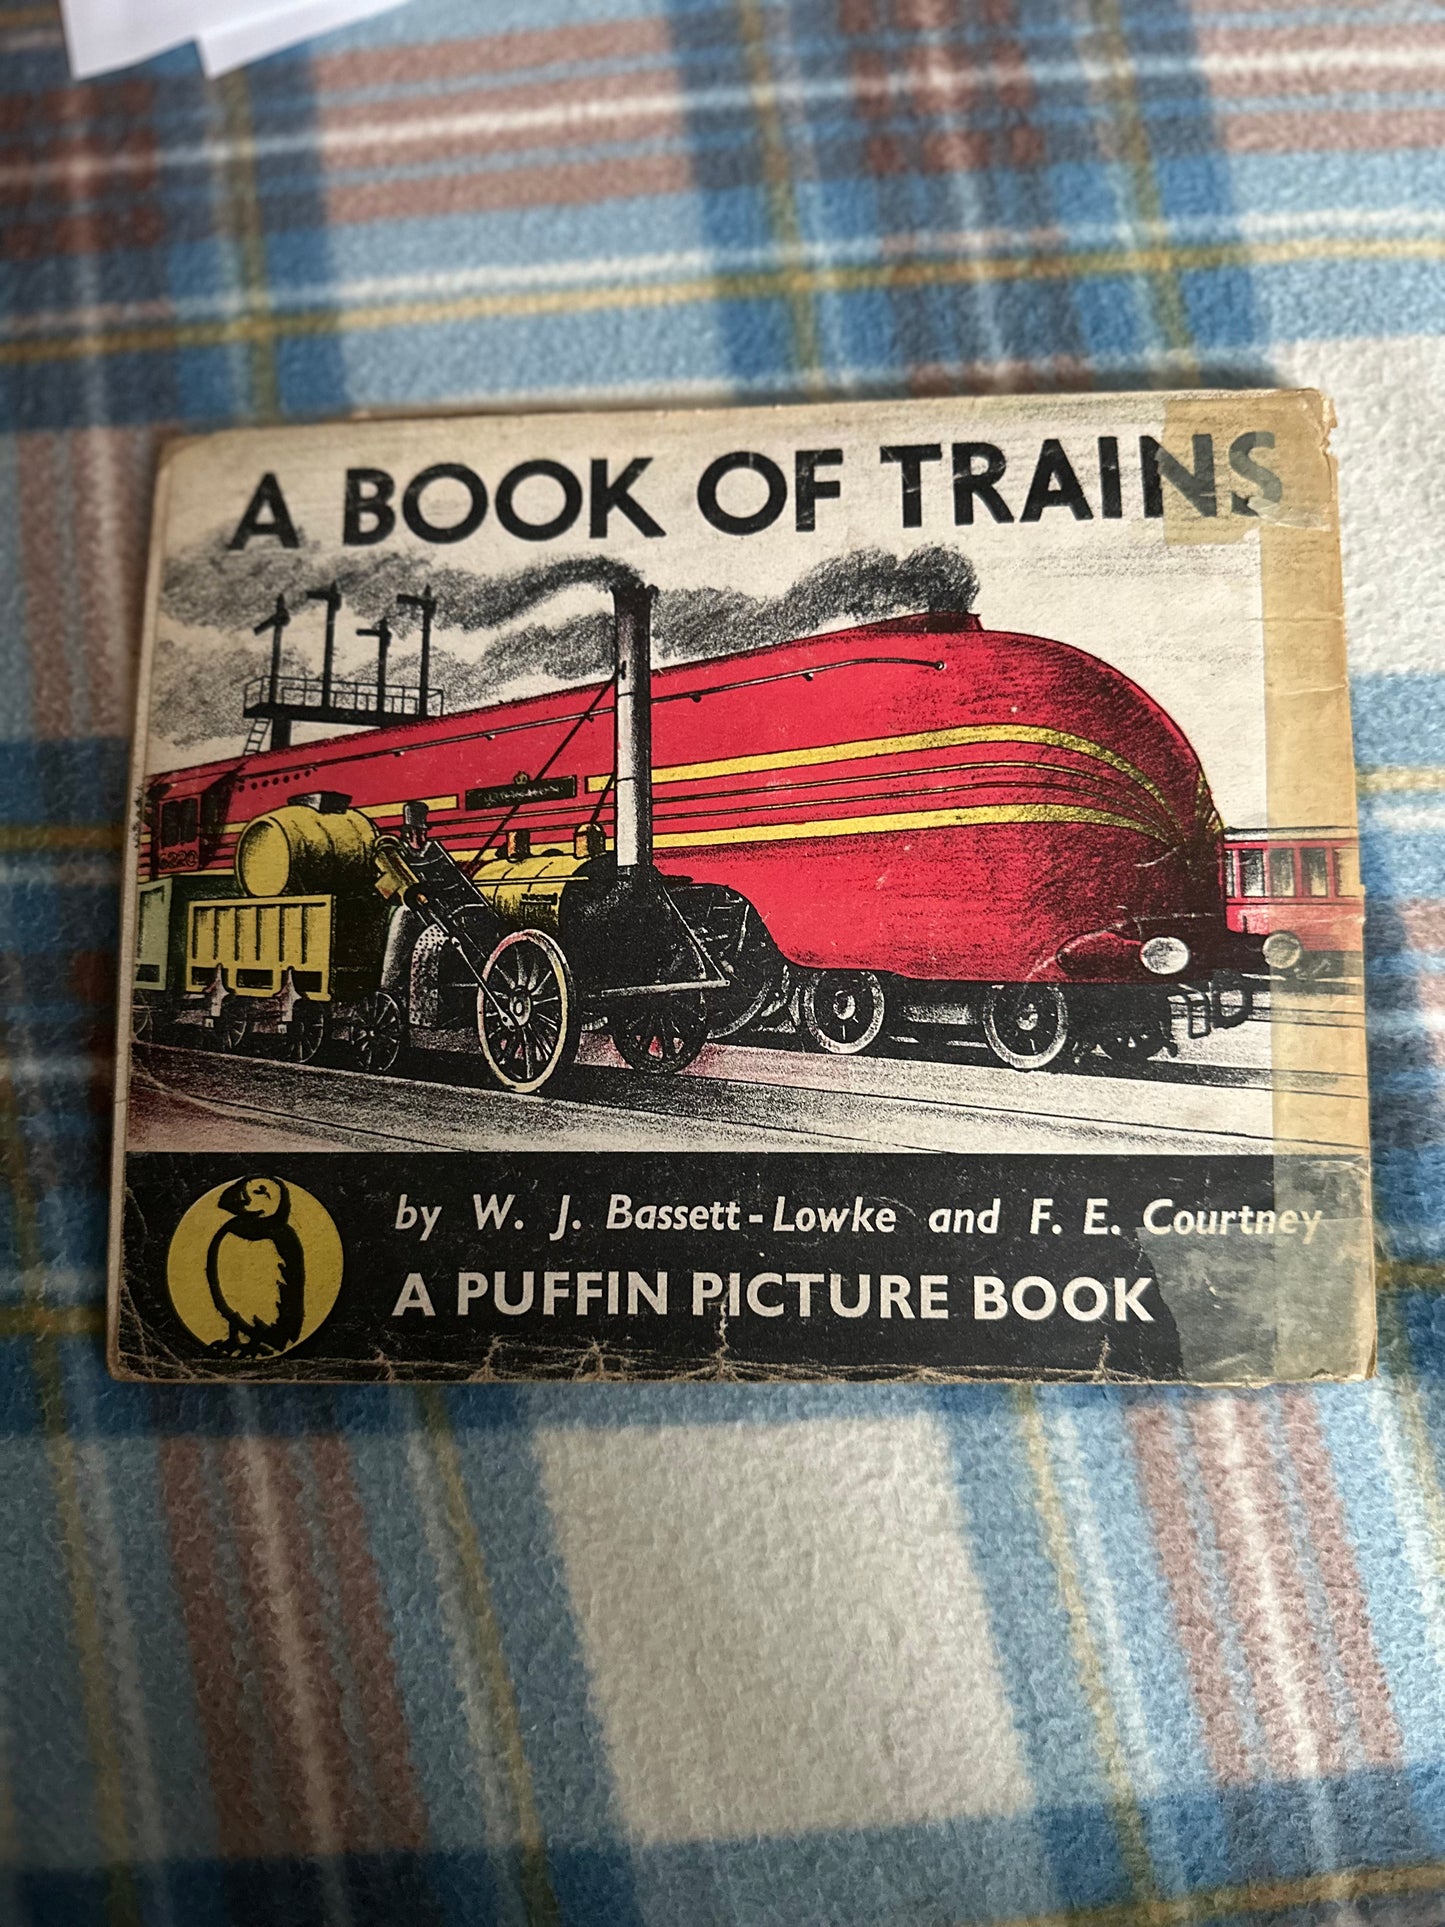 1941*1st* A Book Of Trains(Puffin Picture Book No 10)W.J. Bassett-Lowke & F.E. Courtney(Illust)